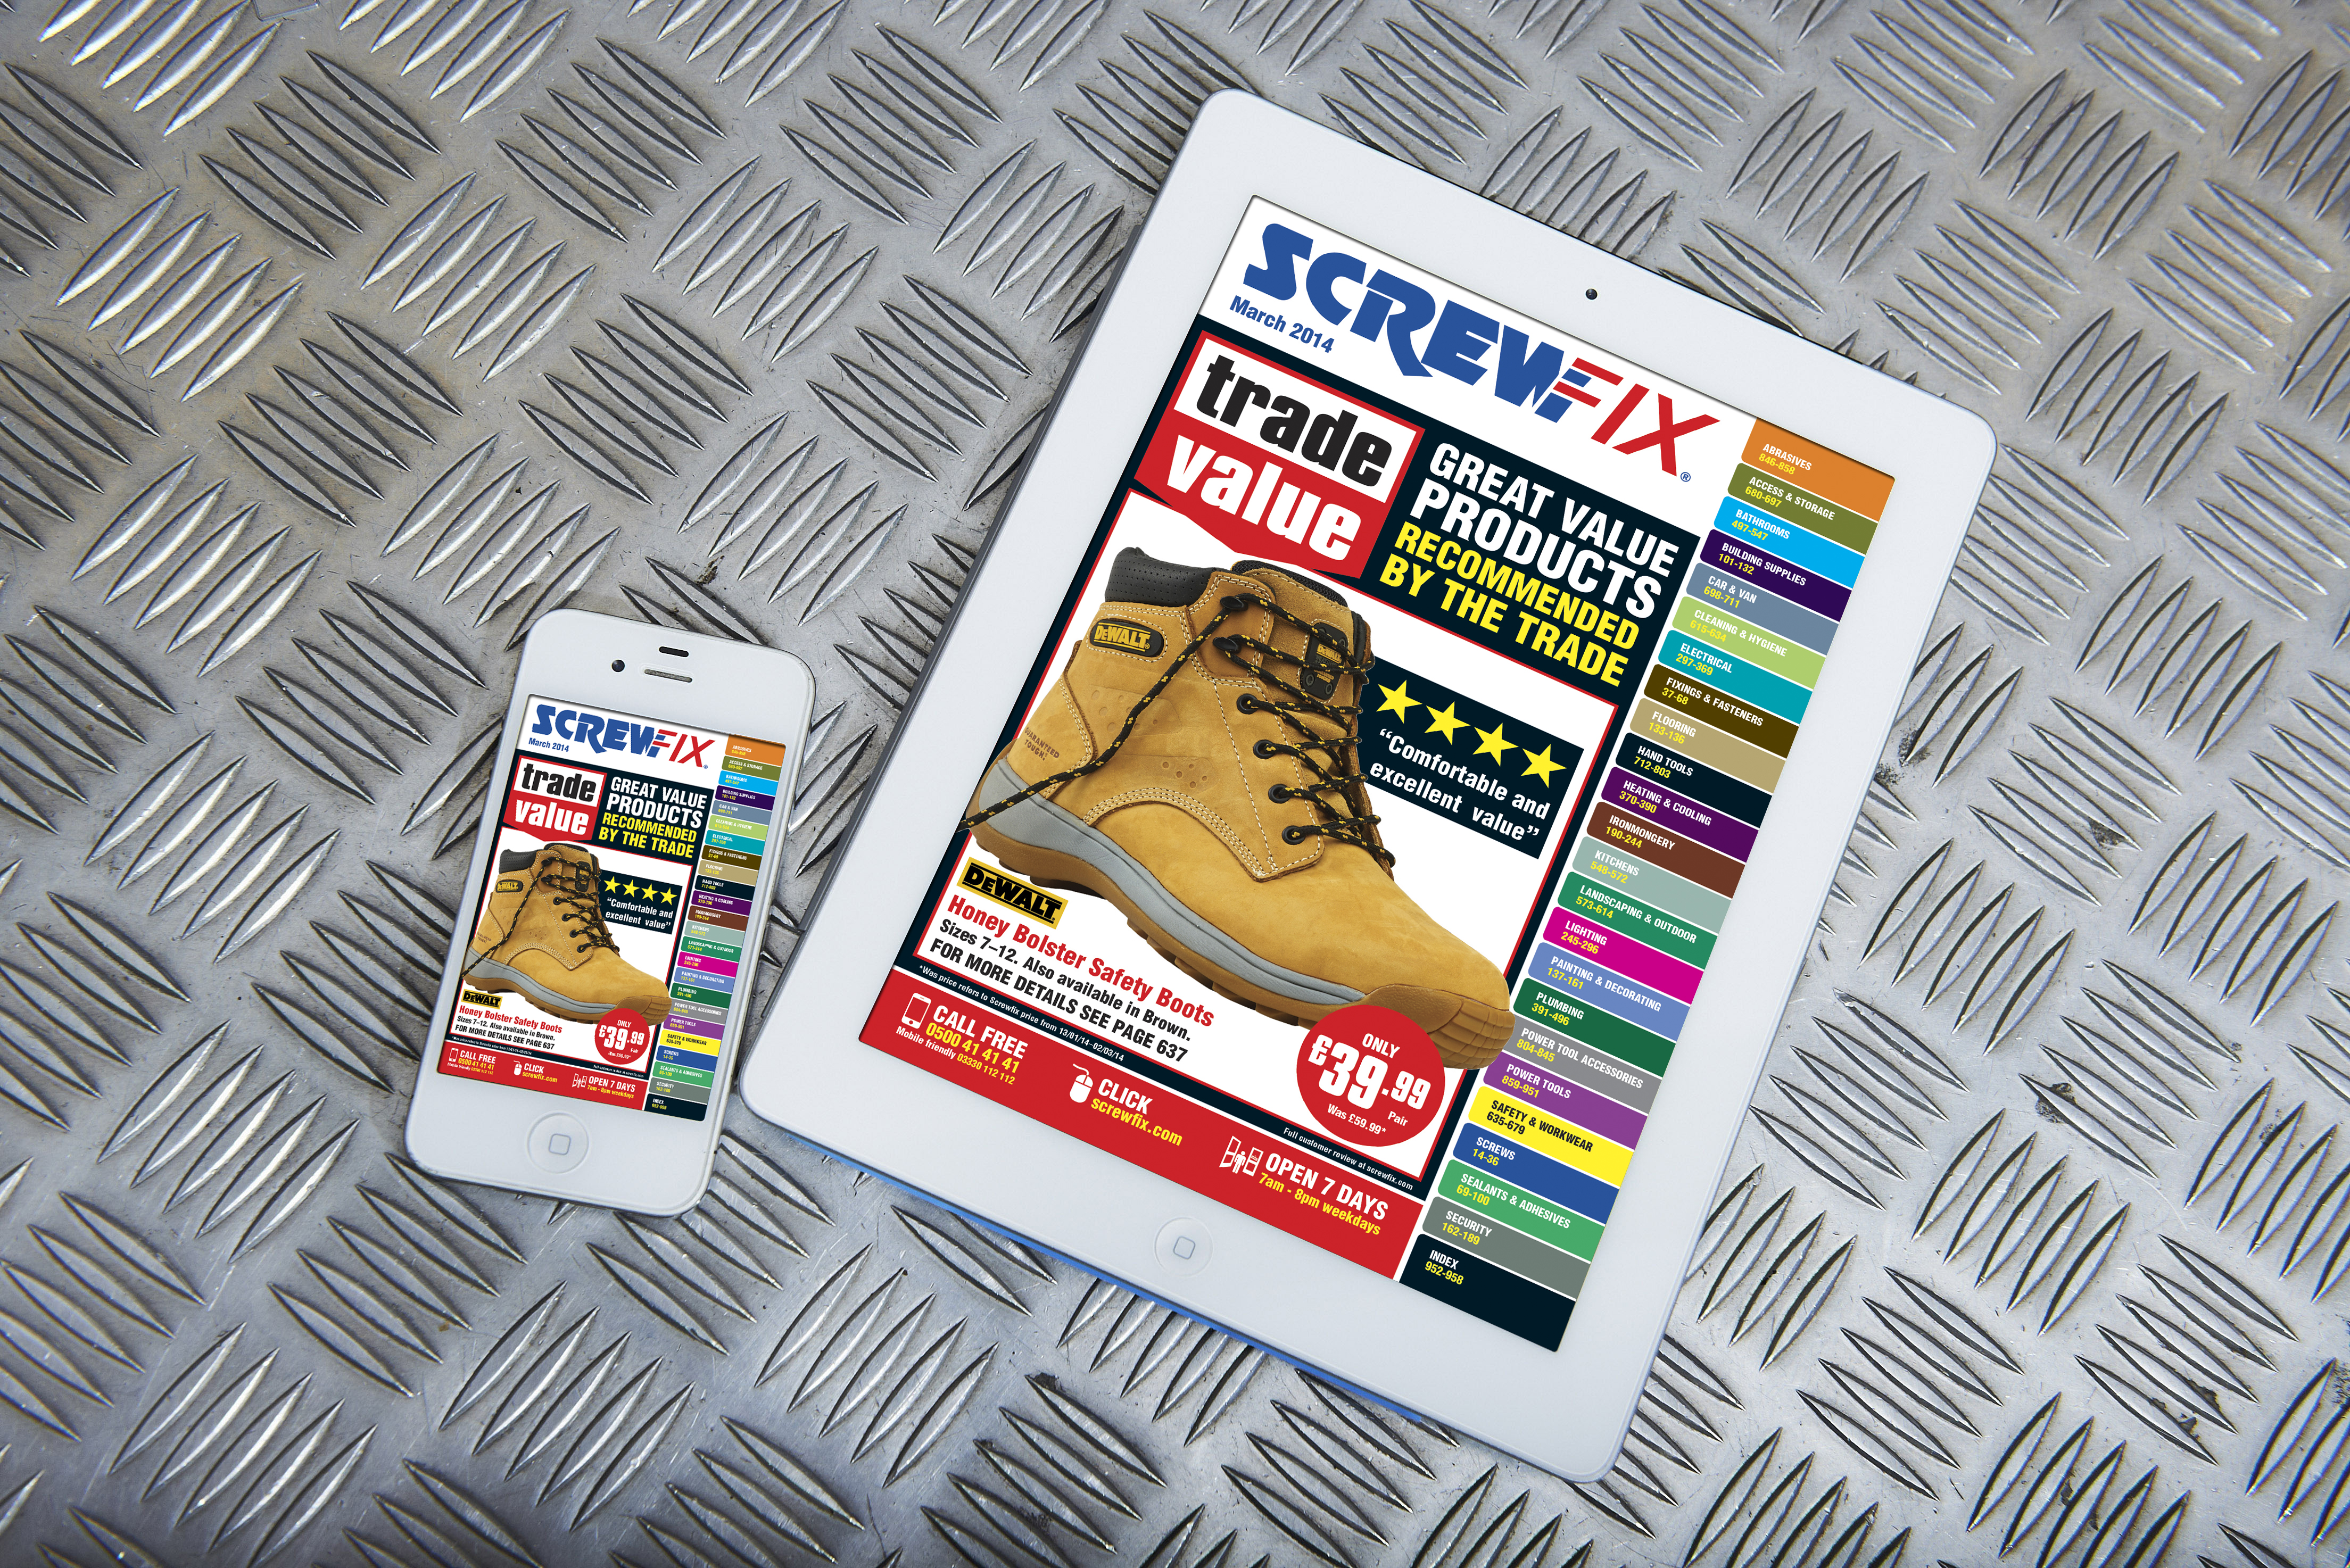 Great Value Winter Essentials From Screwfix